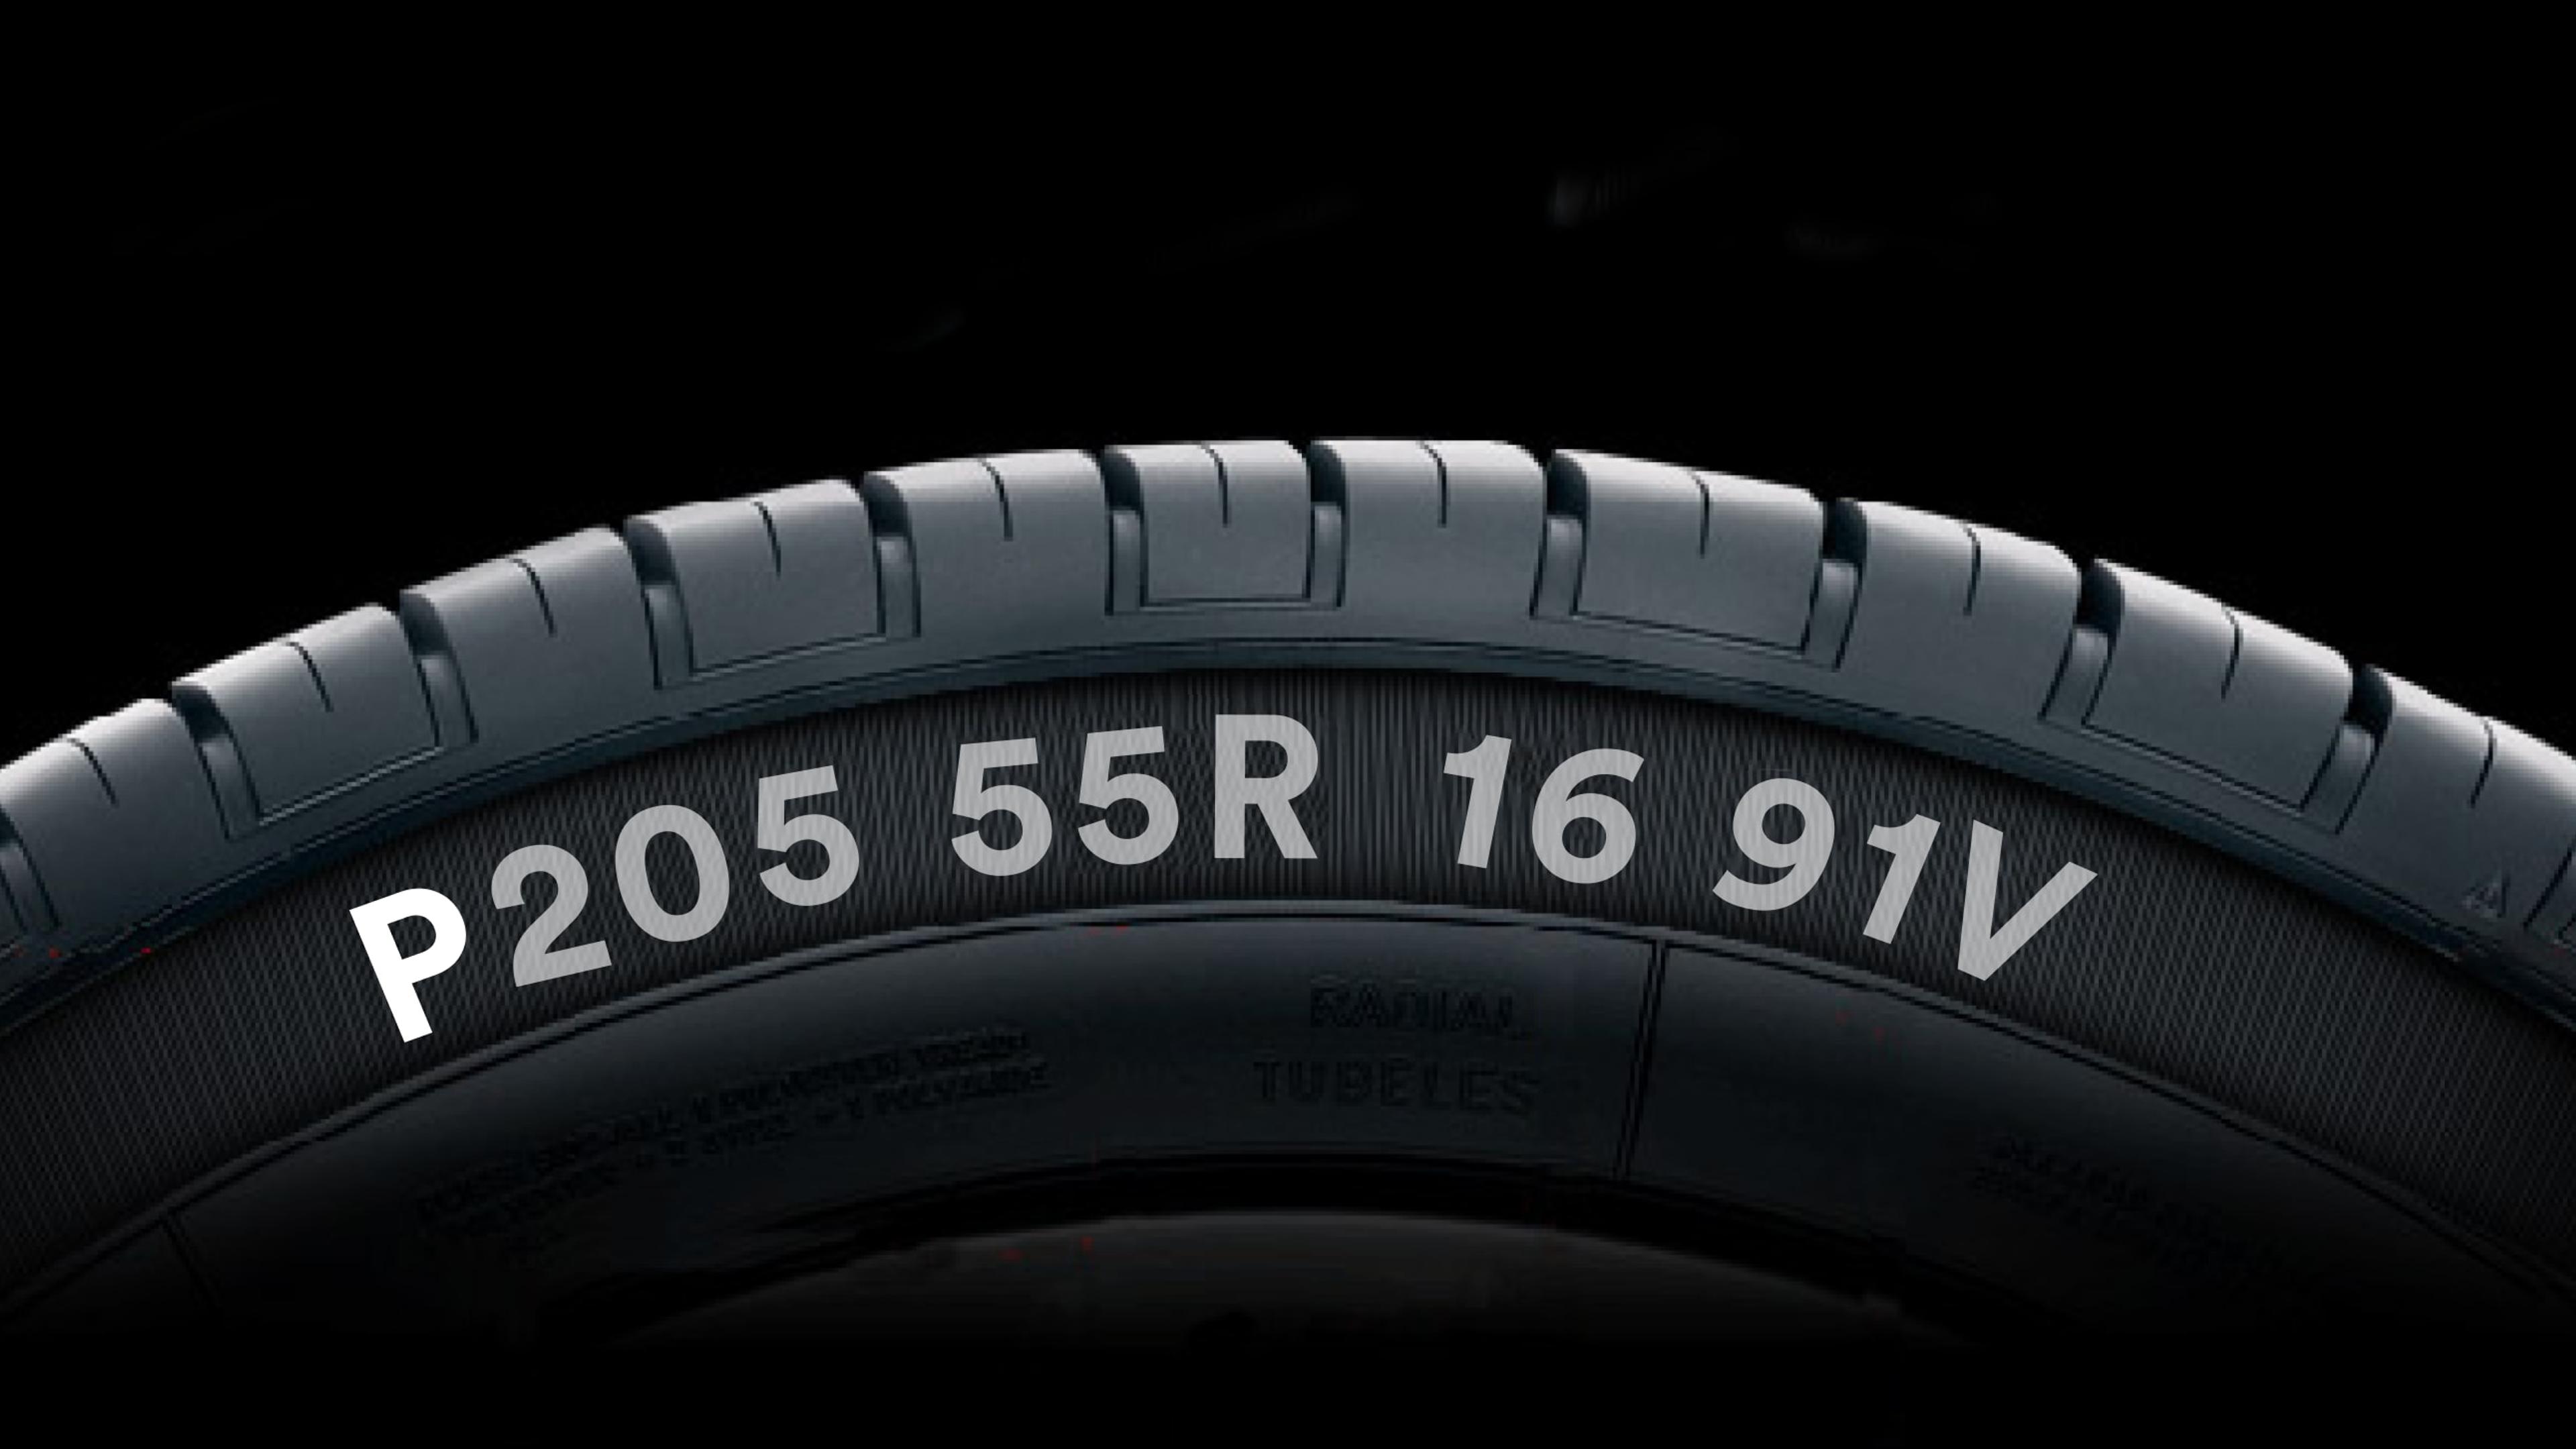 Tire size on a tire sidewall with a highlighted P